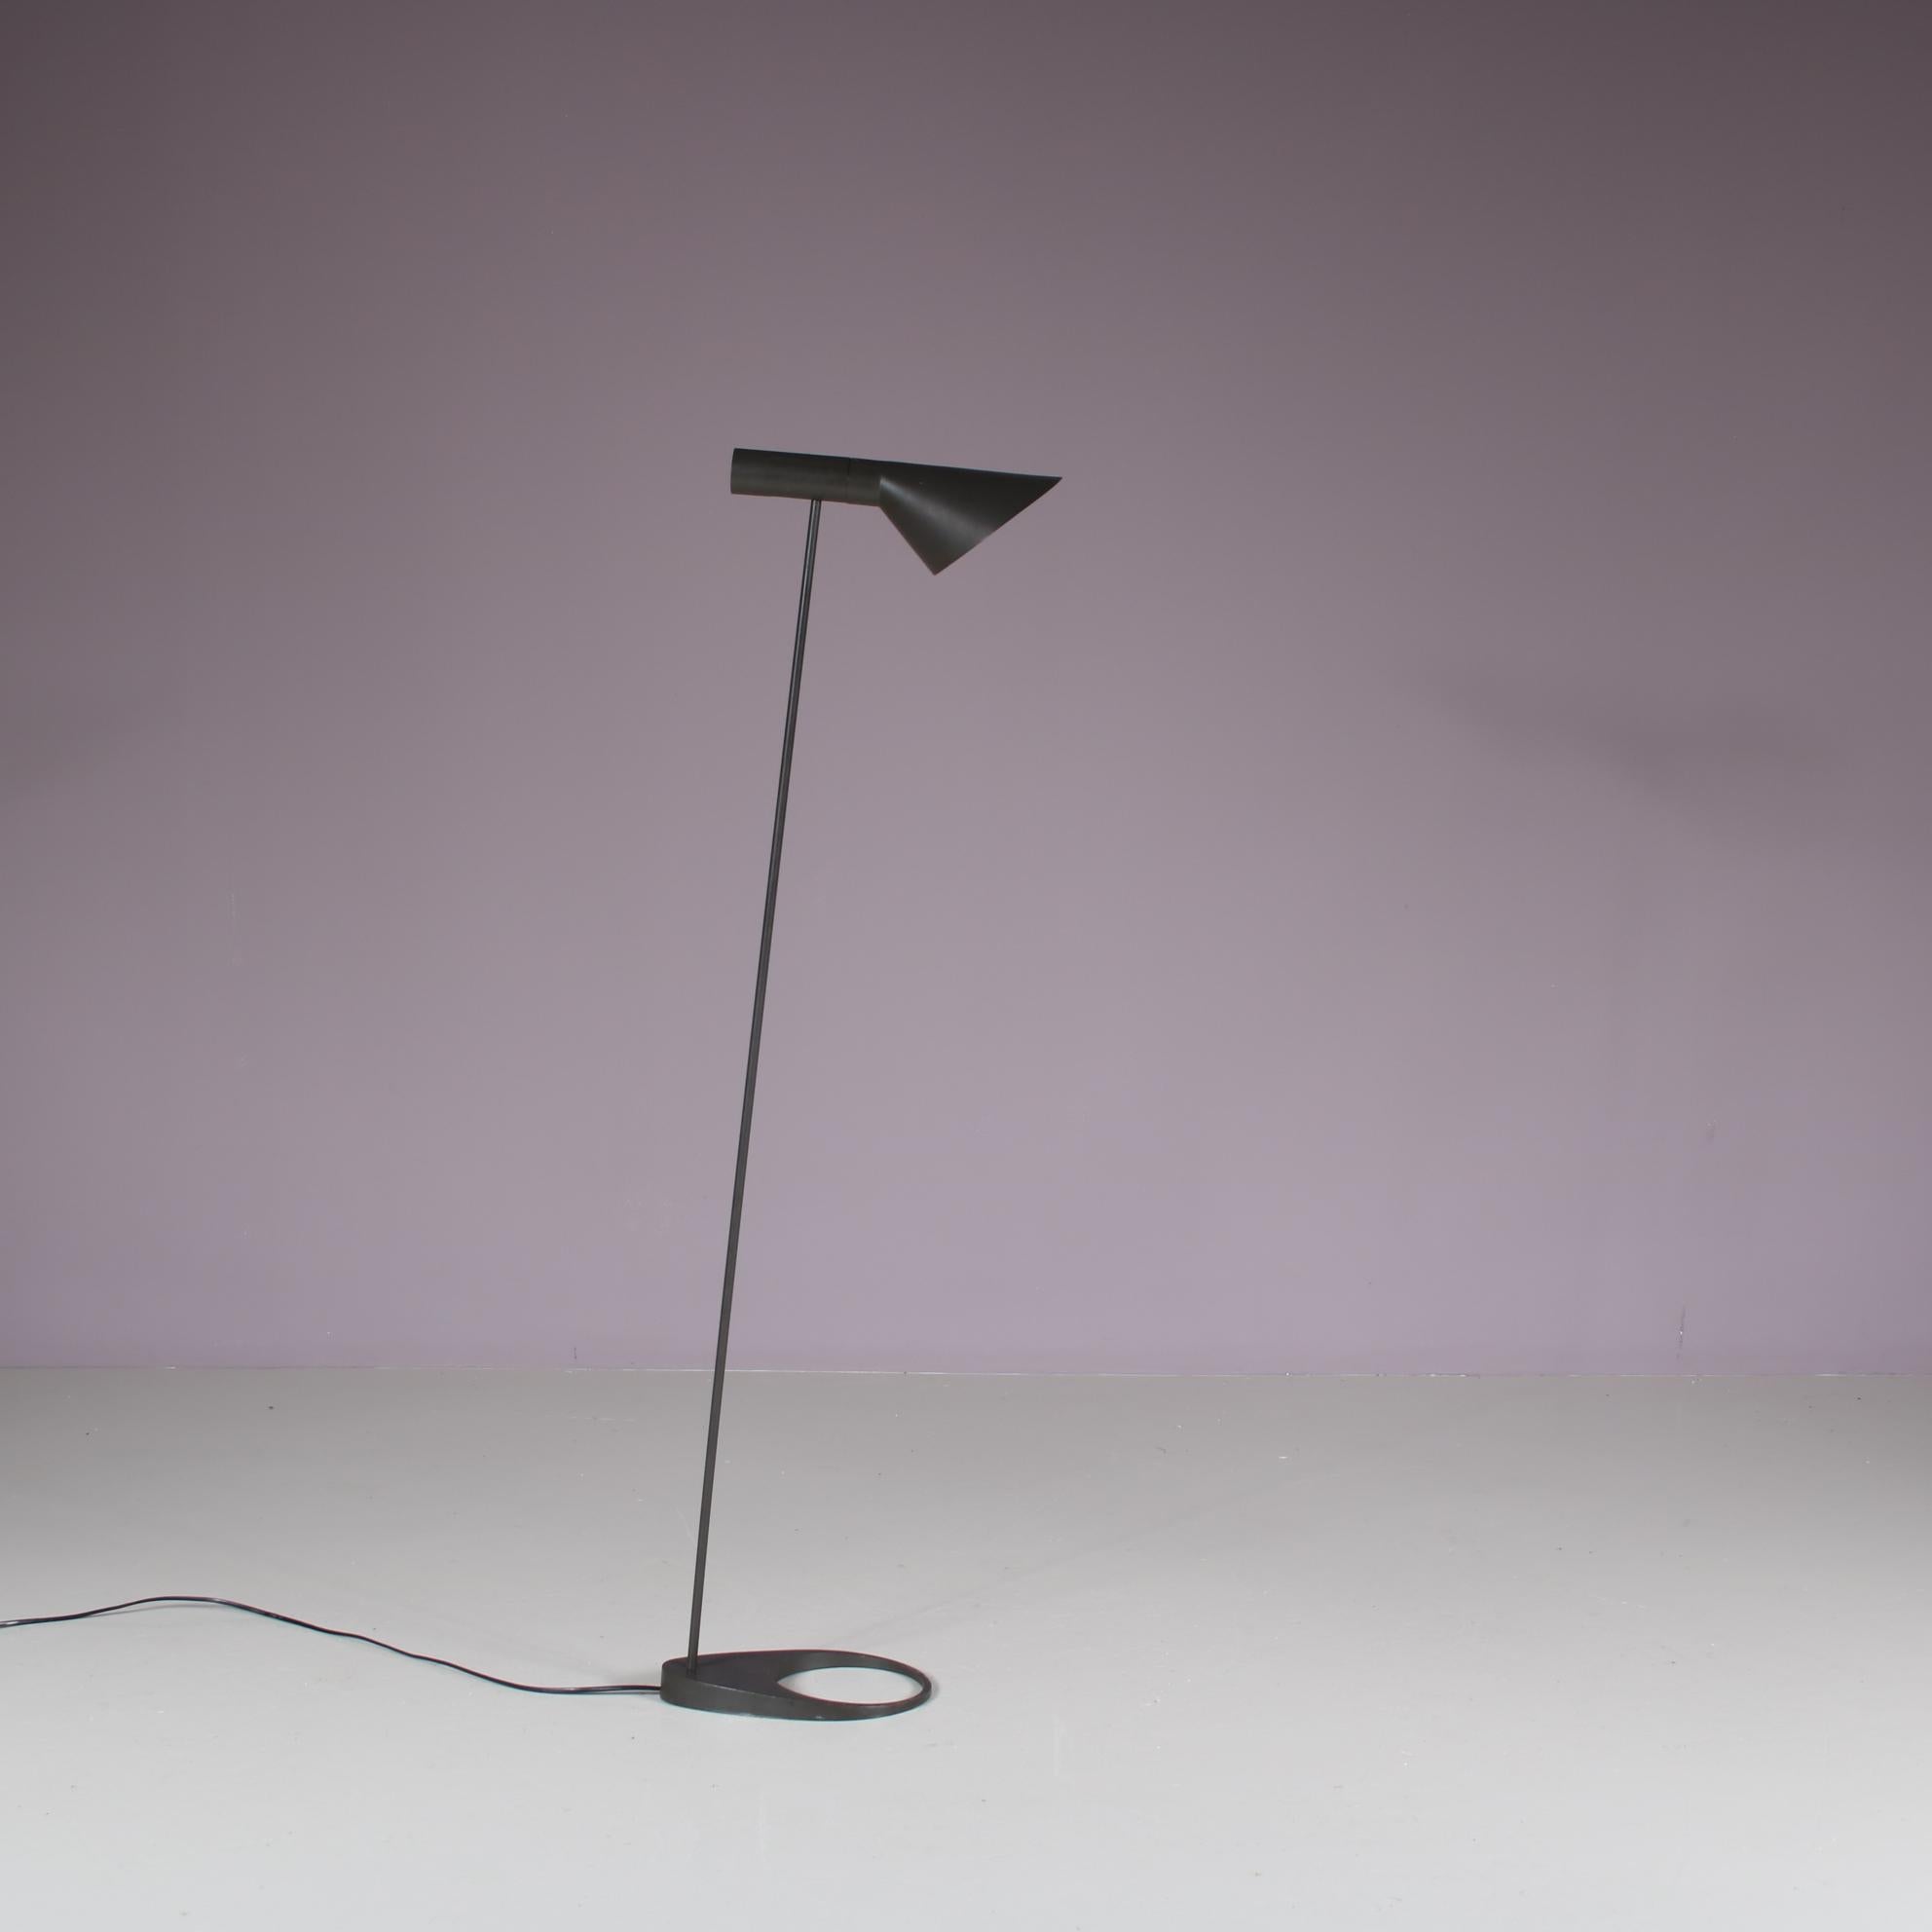 An fantastic floor lamp, model “AJ”, designed by Arne Jacobsen and manufactured by Louis Poulsen in Denmark around 1960.

This elegant, minimalist piece is an iconic find of mid-century Scandinavian lighting! Made of high quality black lacquered